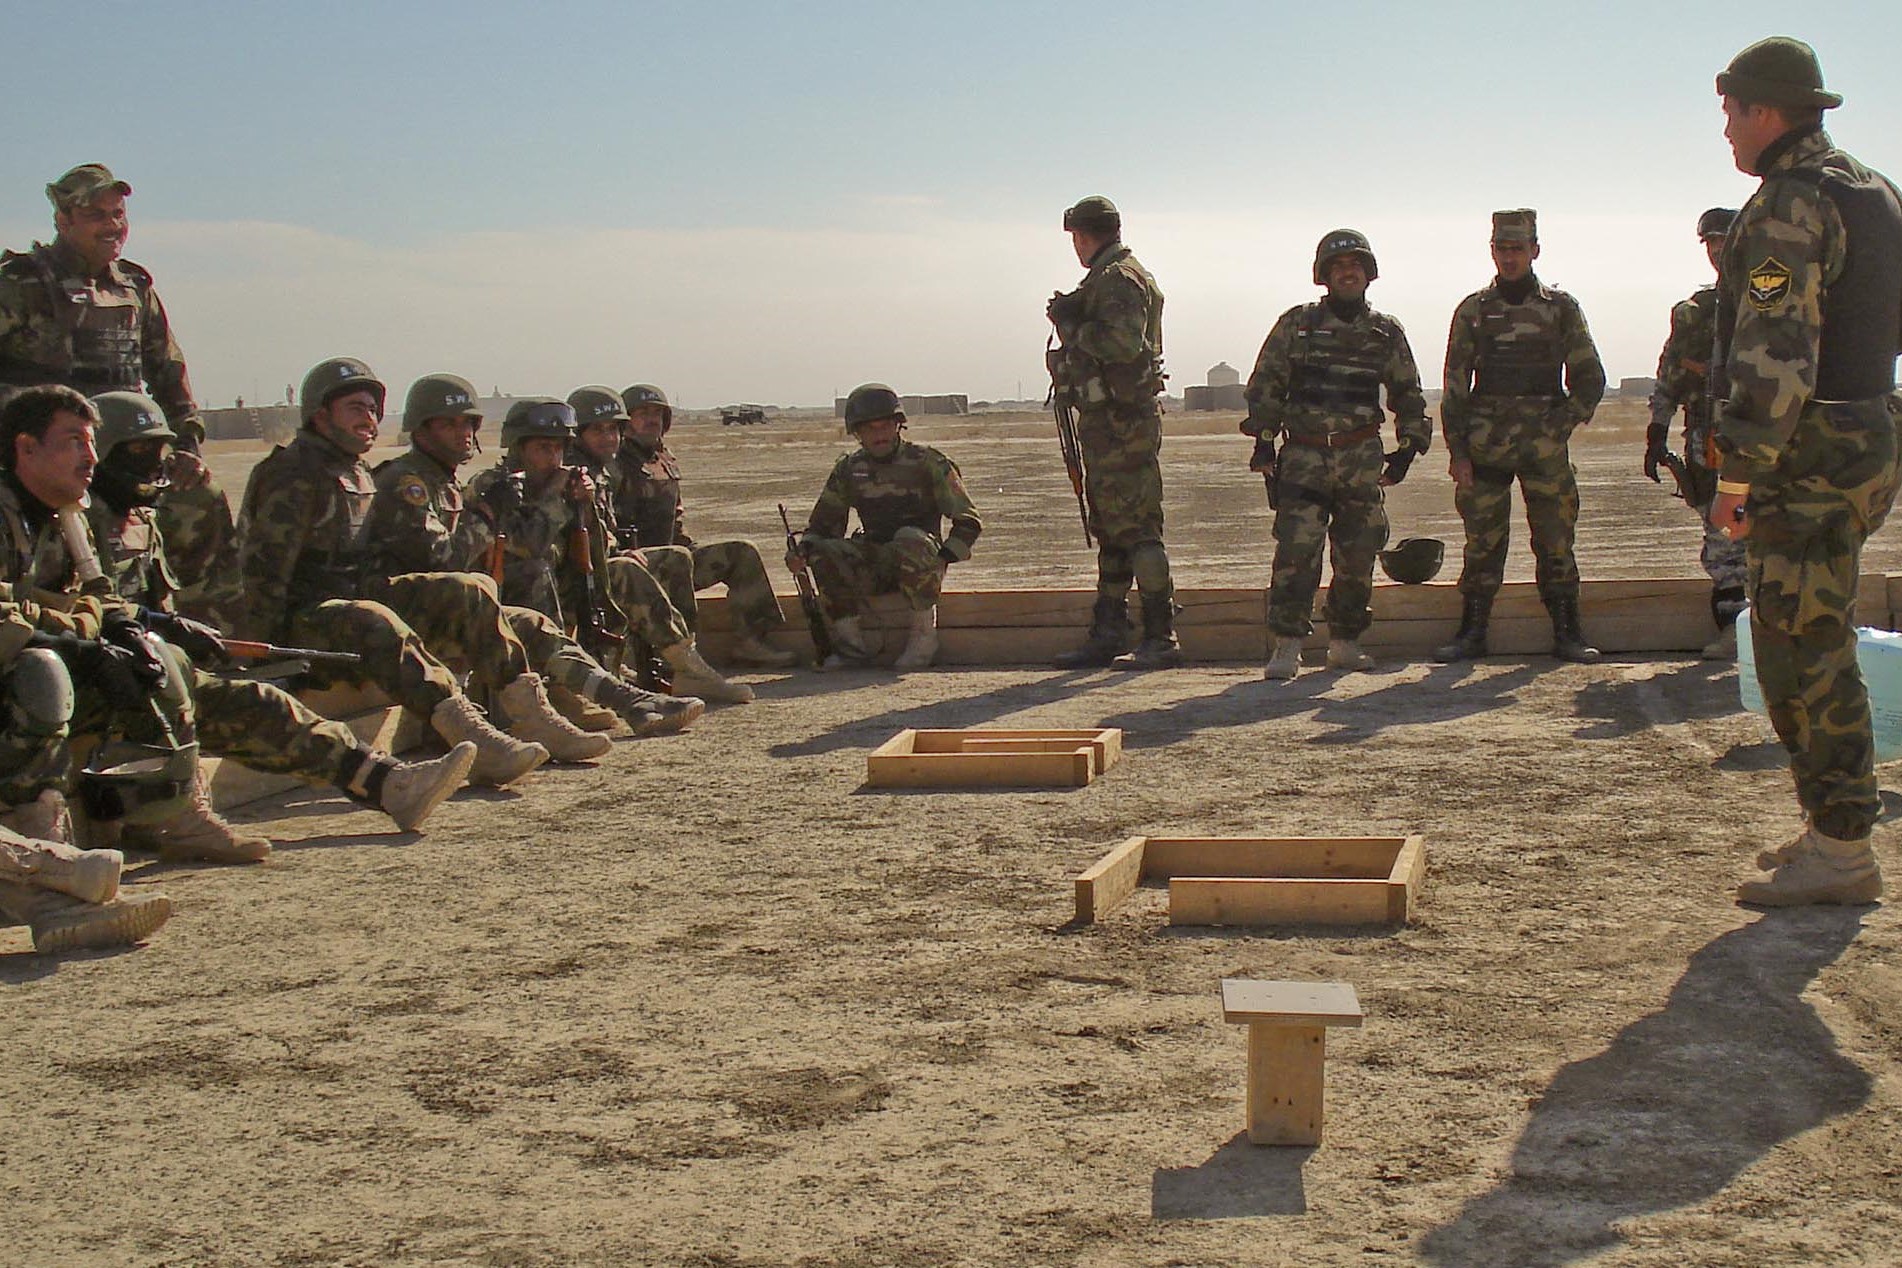 Iraqi policeman Lt. Ahmed, center, and members of his special weapons and tactics team look on during training at Convoy Support Center Cedar in Iraq’s Dhi Qar province in December 2008.